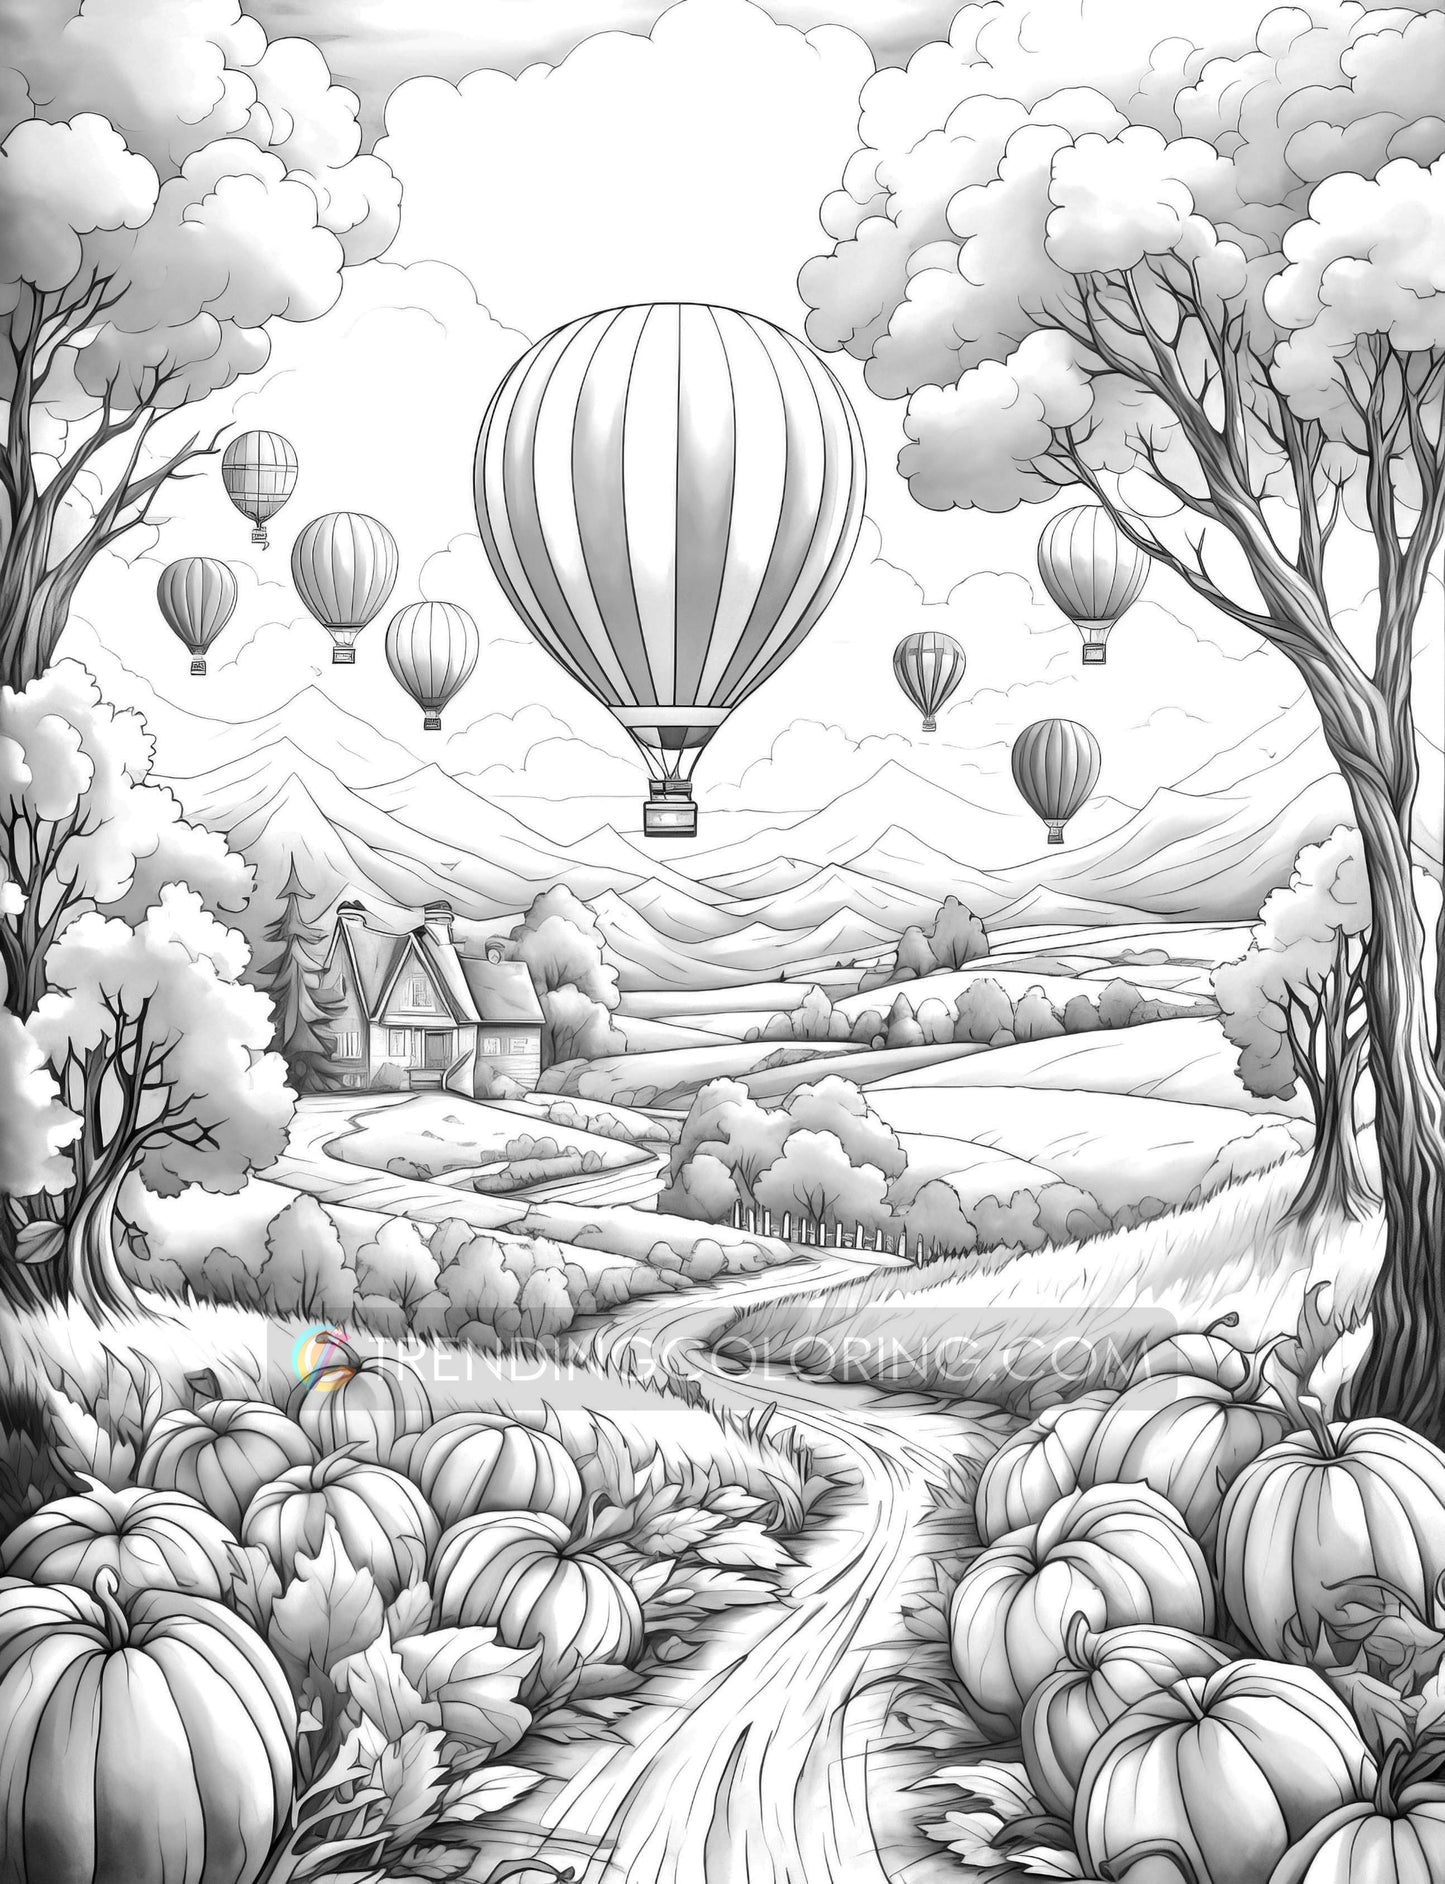 50 Autumn Farmland Grayscale Coloring Pages - Instant Download - Printable PDF Dark/Light